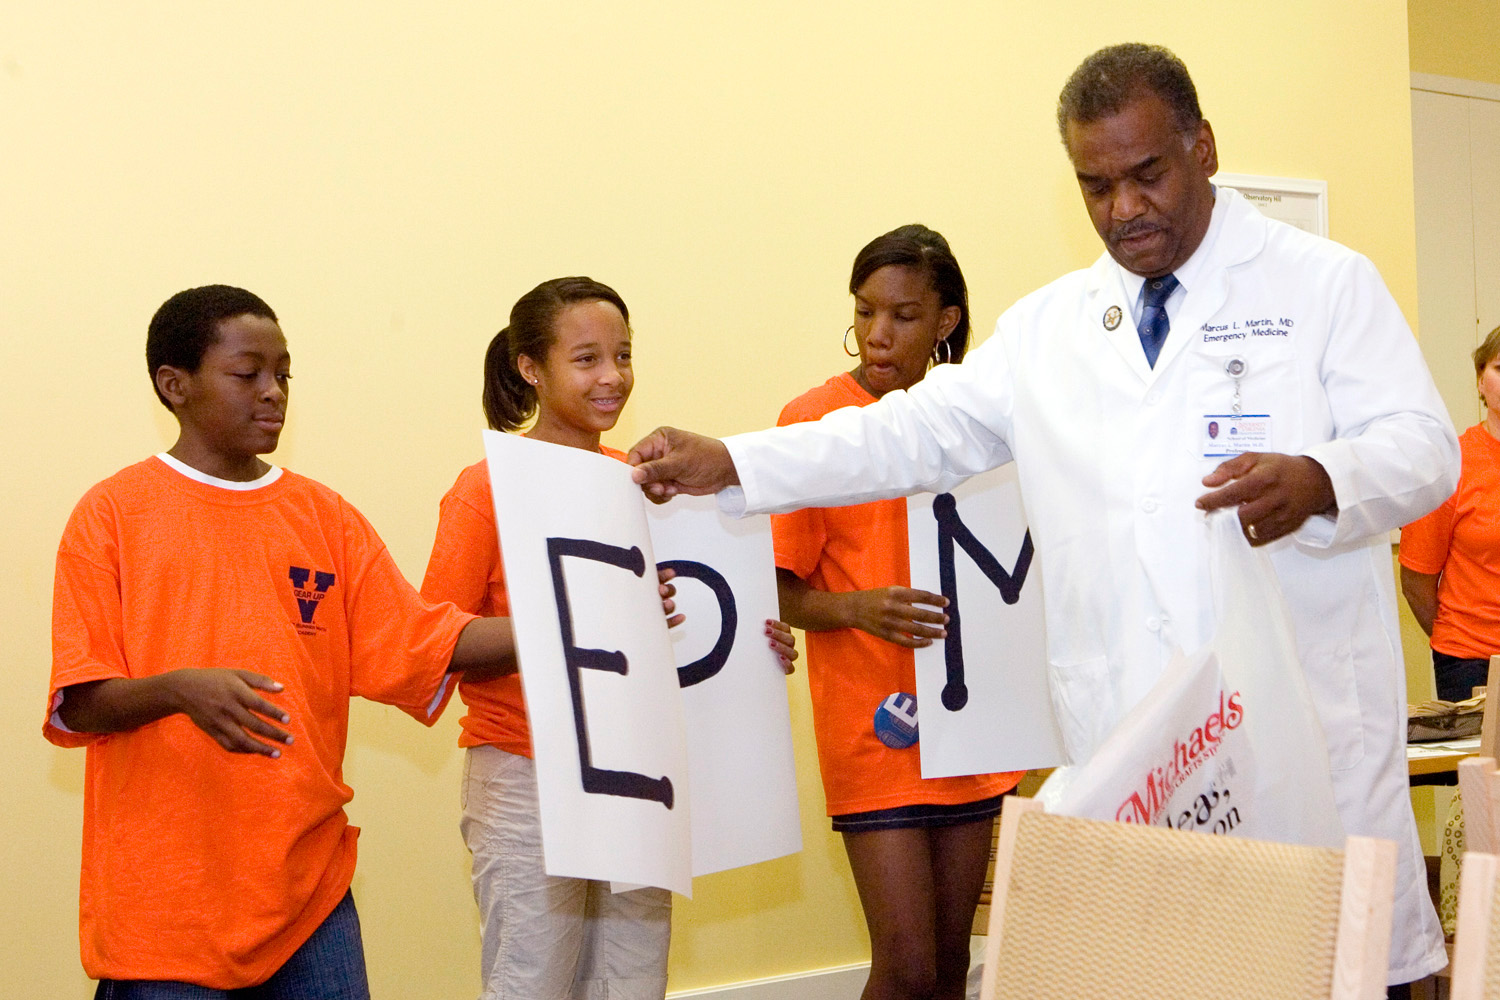 Dr. Marcus Martin hands letters to small children who are standing in a line